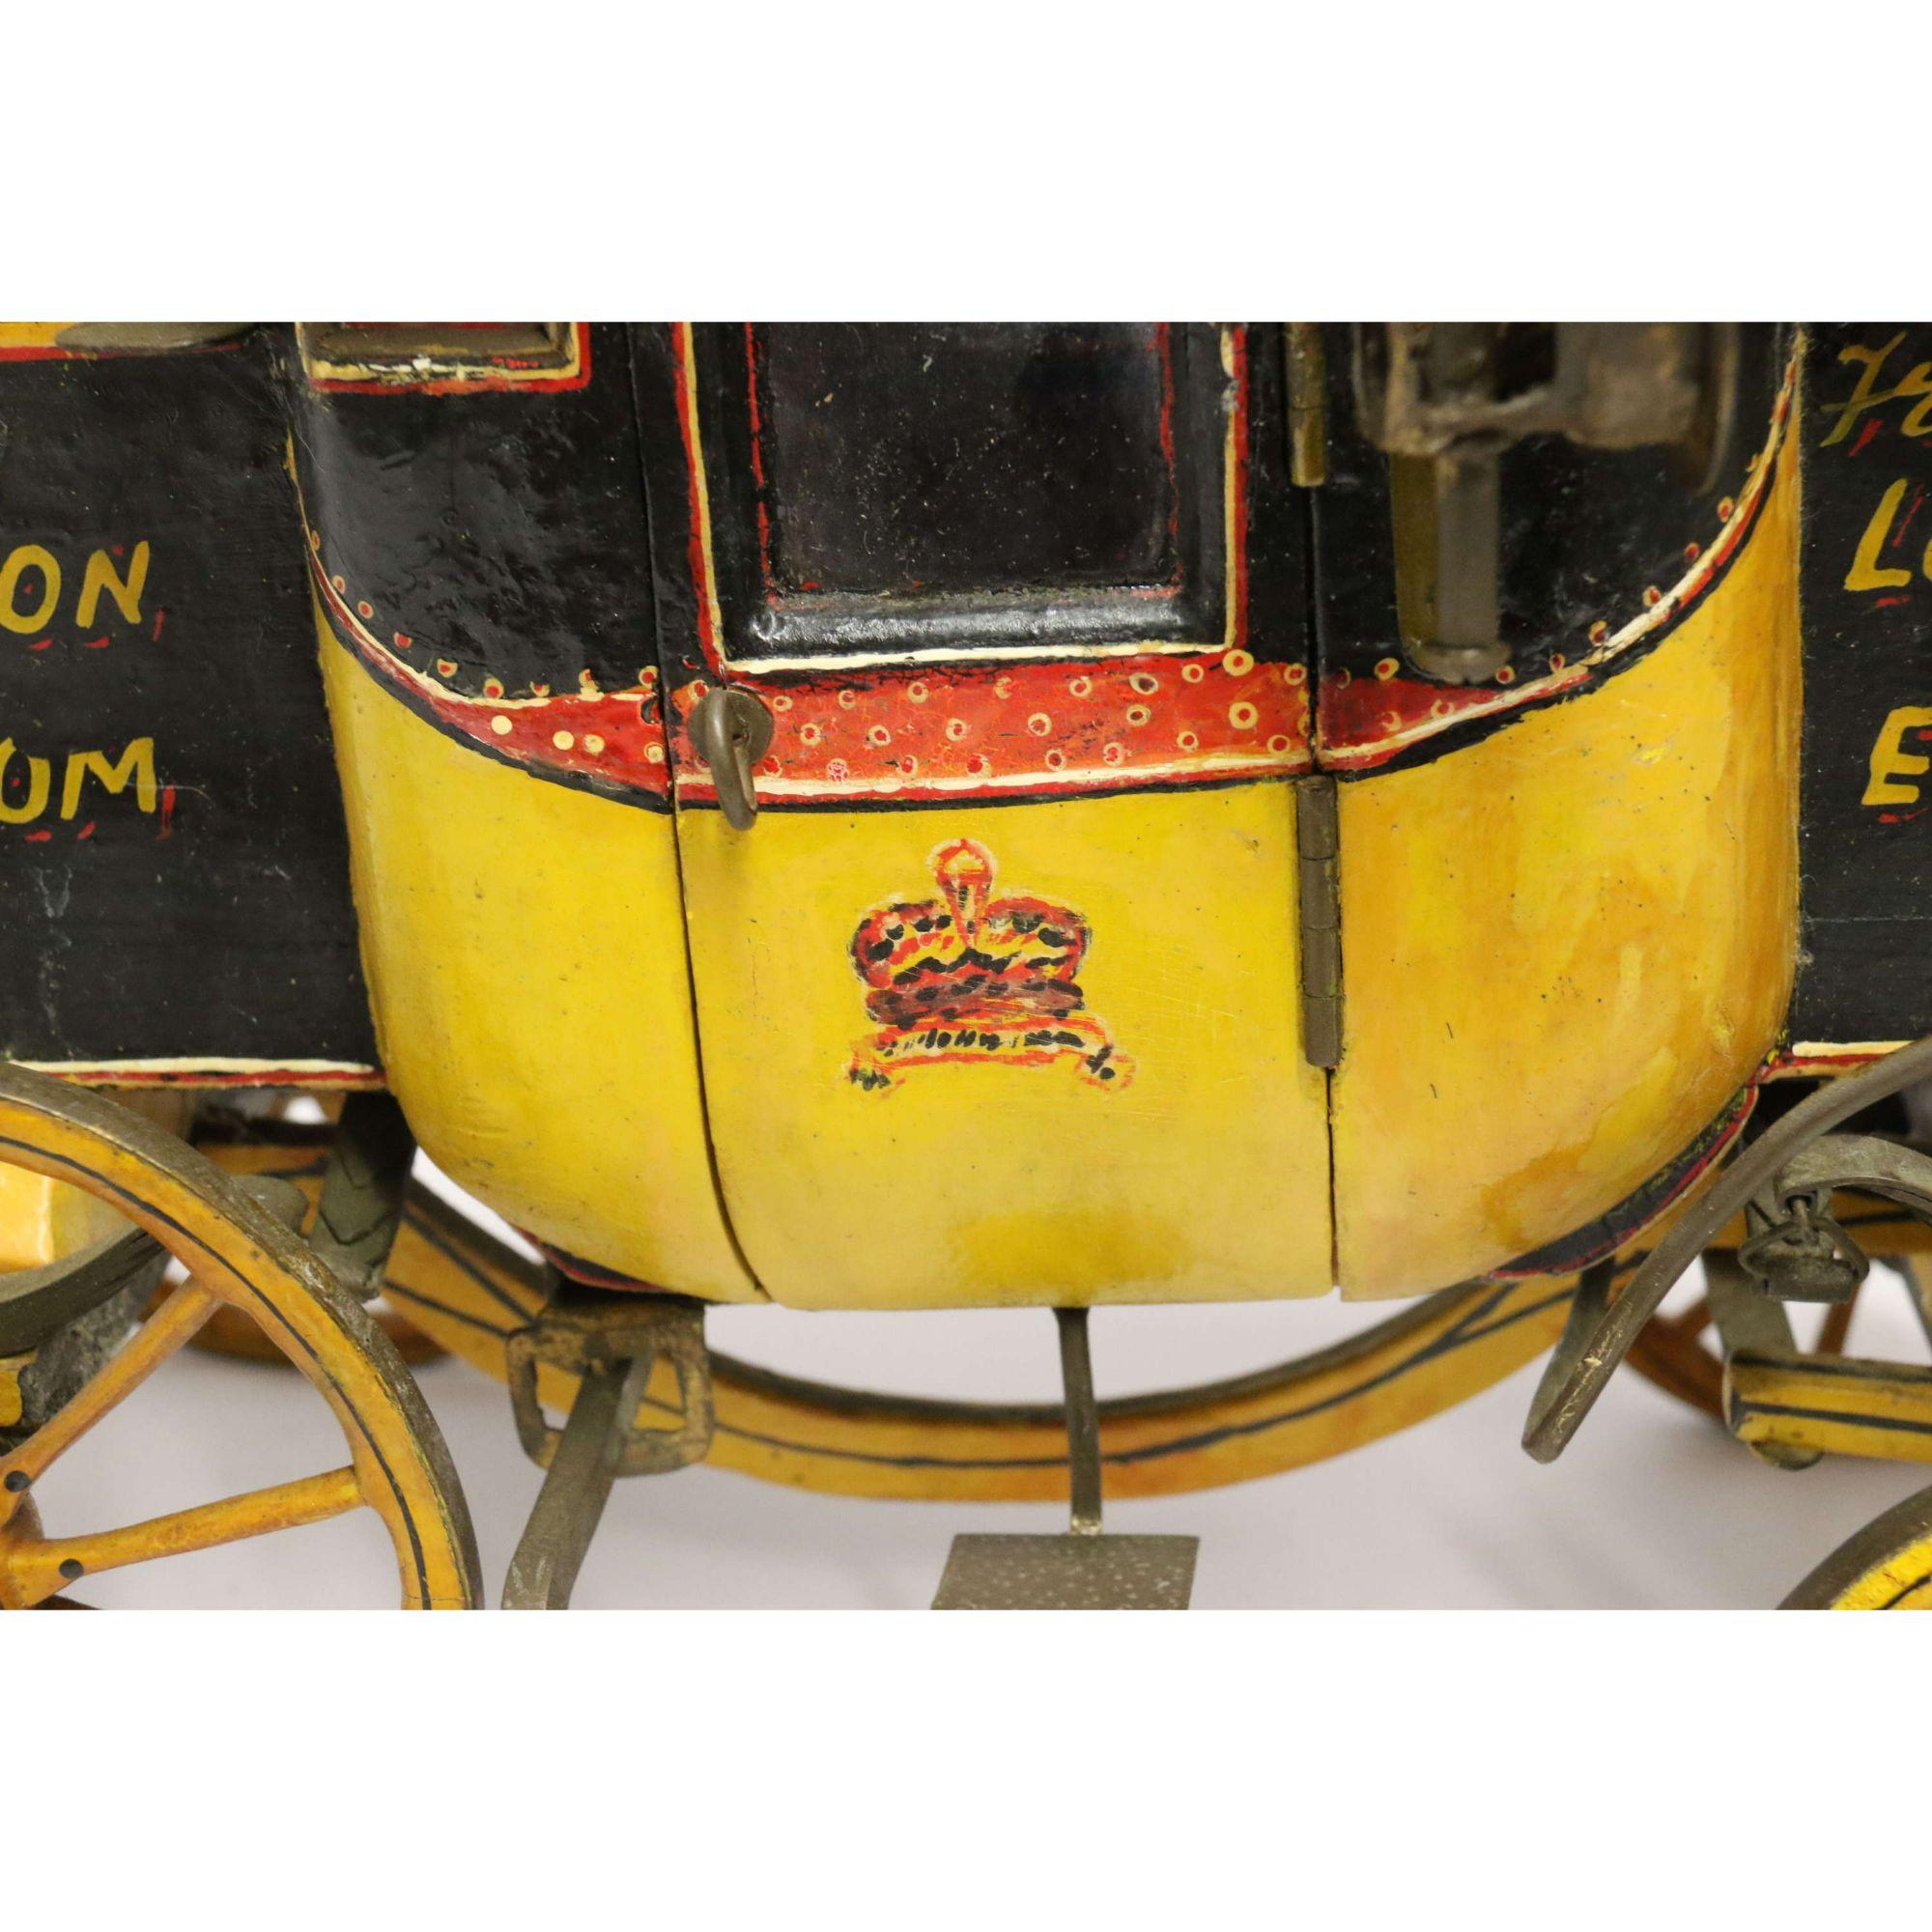 Wood  English Model of an 18th Century London to Epsom Stagecoach, Edwardian Period